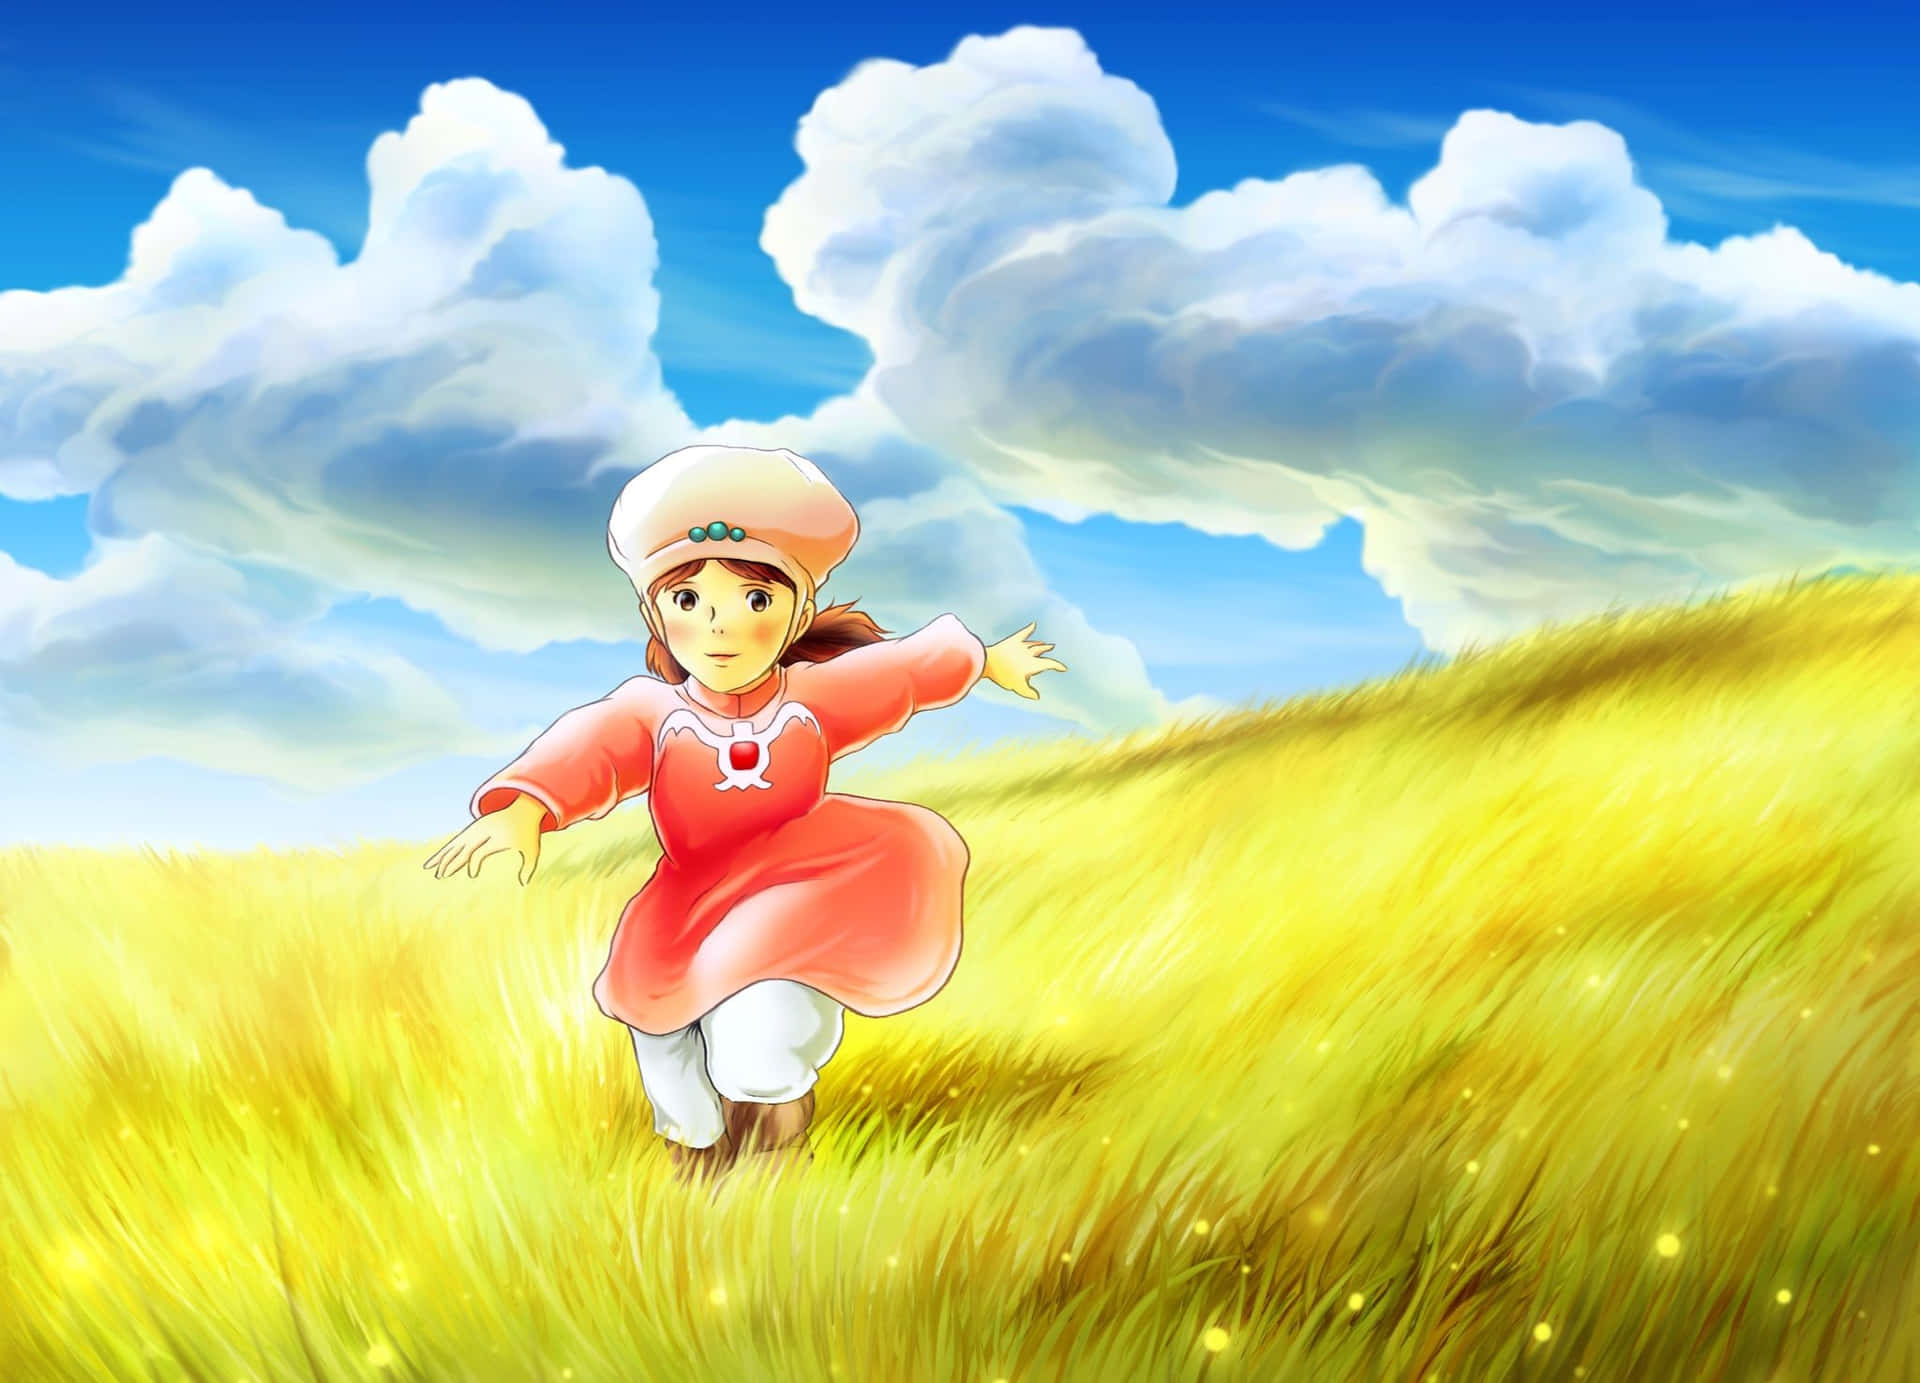 Nausicaä soaring through the skies on her glider amidst the stunning landscape of the Valley of the Wind. Wallpaper